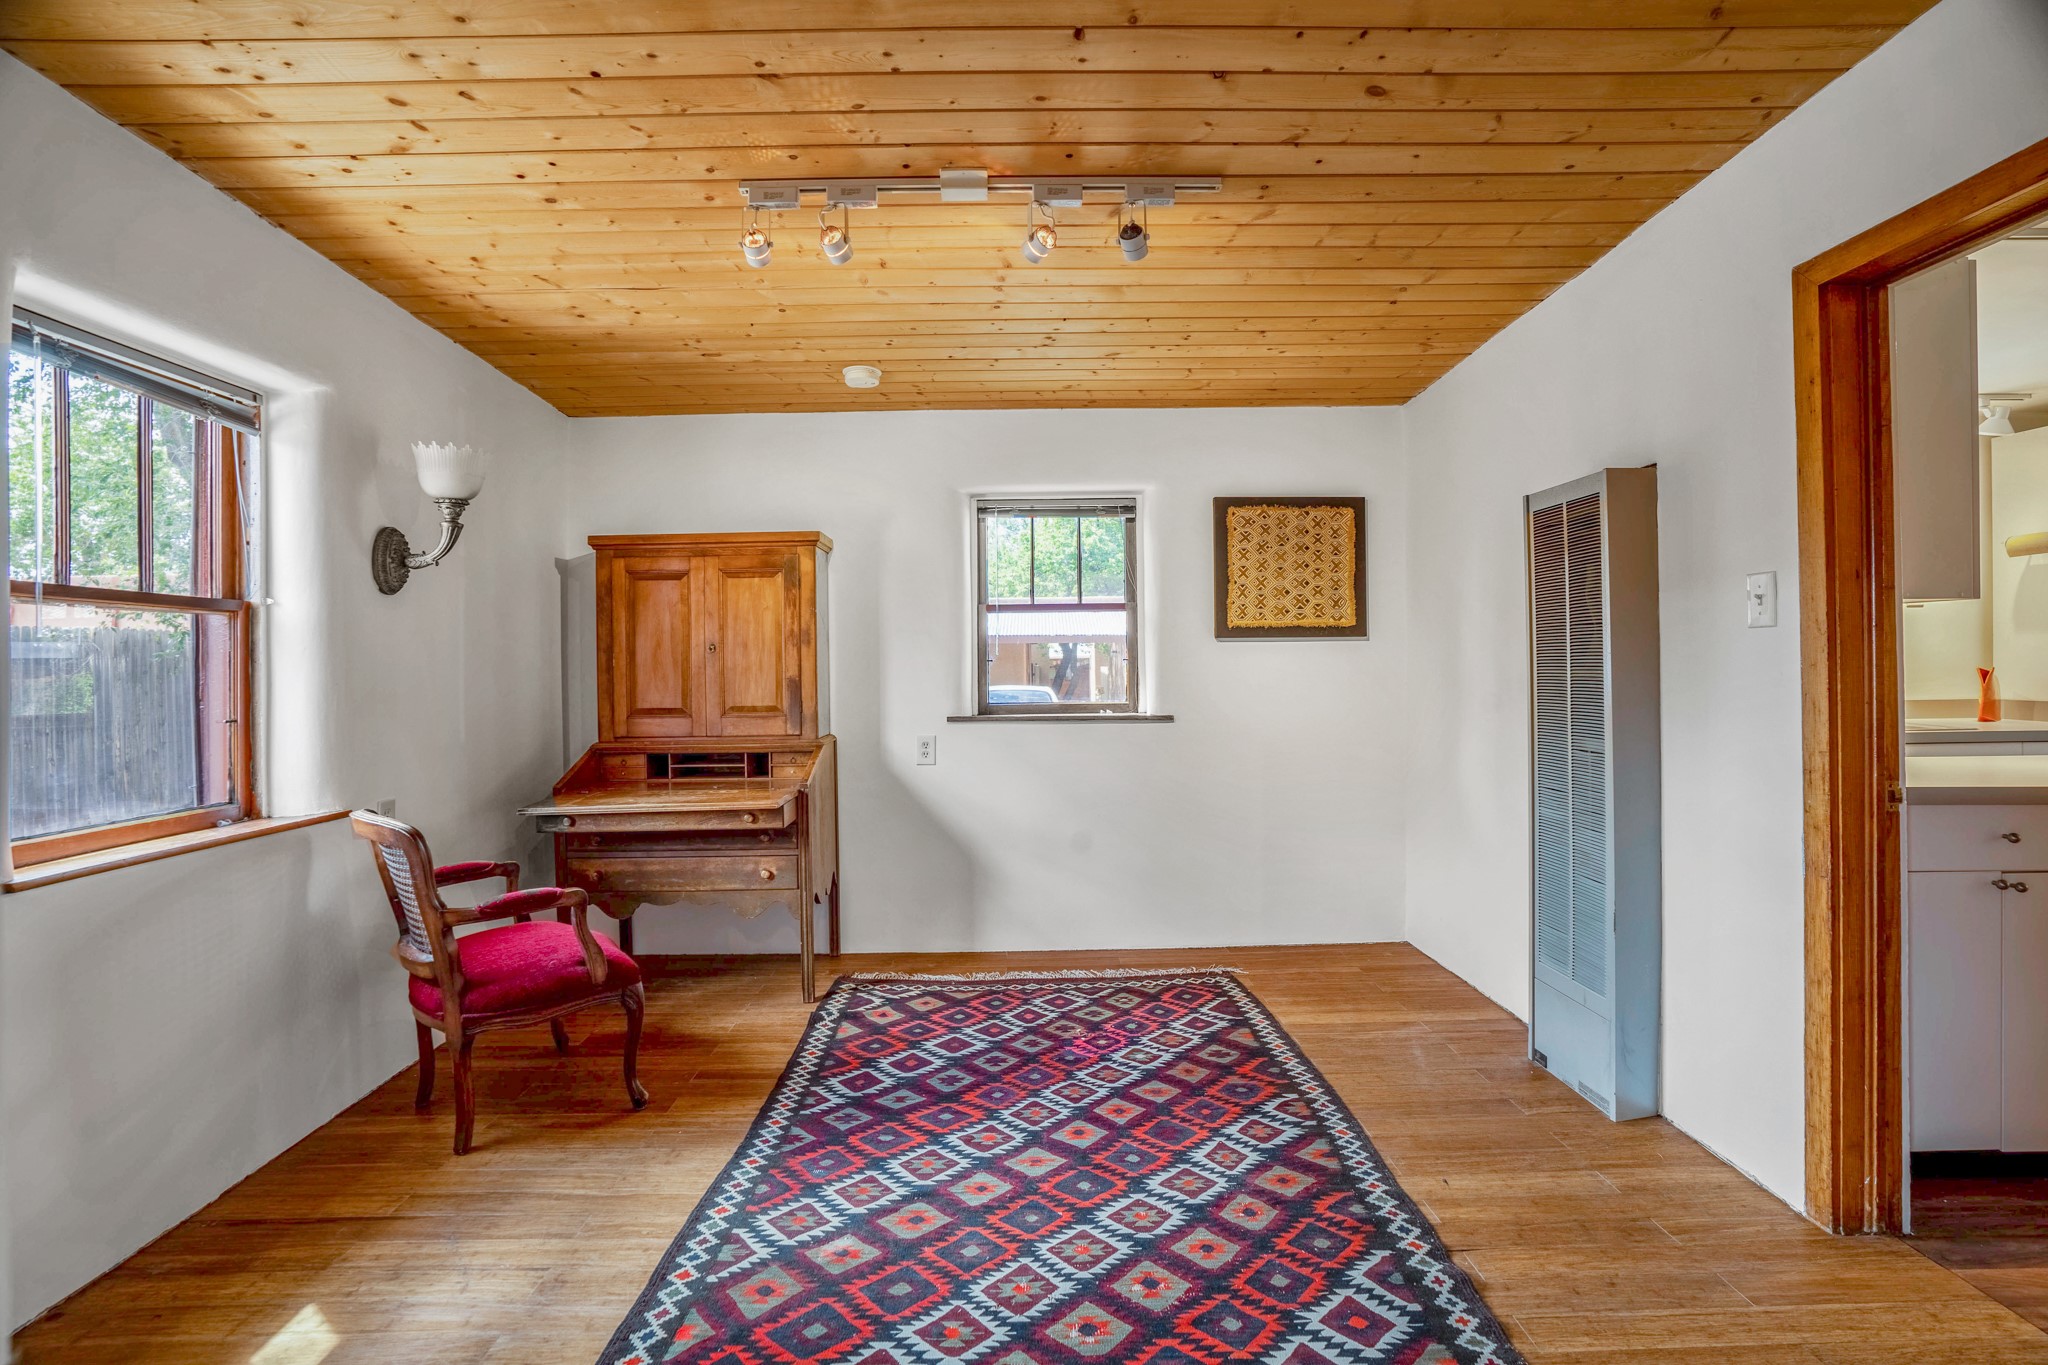 730 Columbia Street A, Santa Fe, New Mexico 87505, 1 Bedroom Bedrooms, ,1 BathroomBathrooms,Residential,For Sale,730 Columbia Street A,202232805